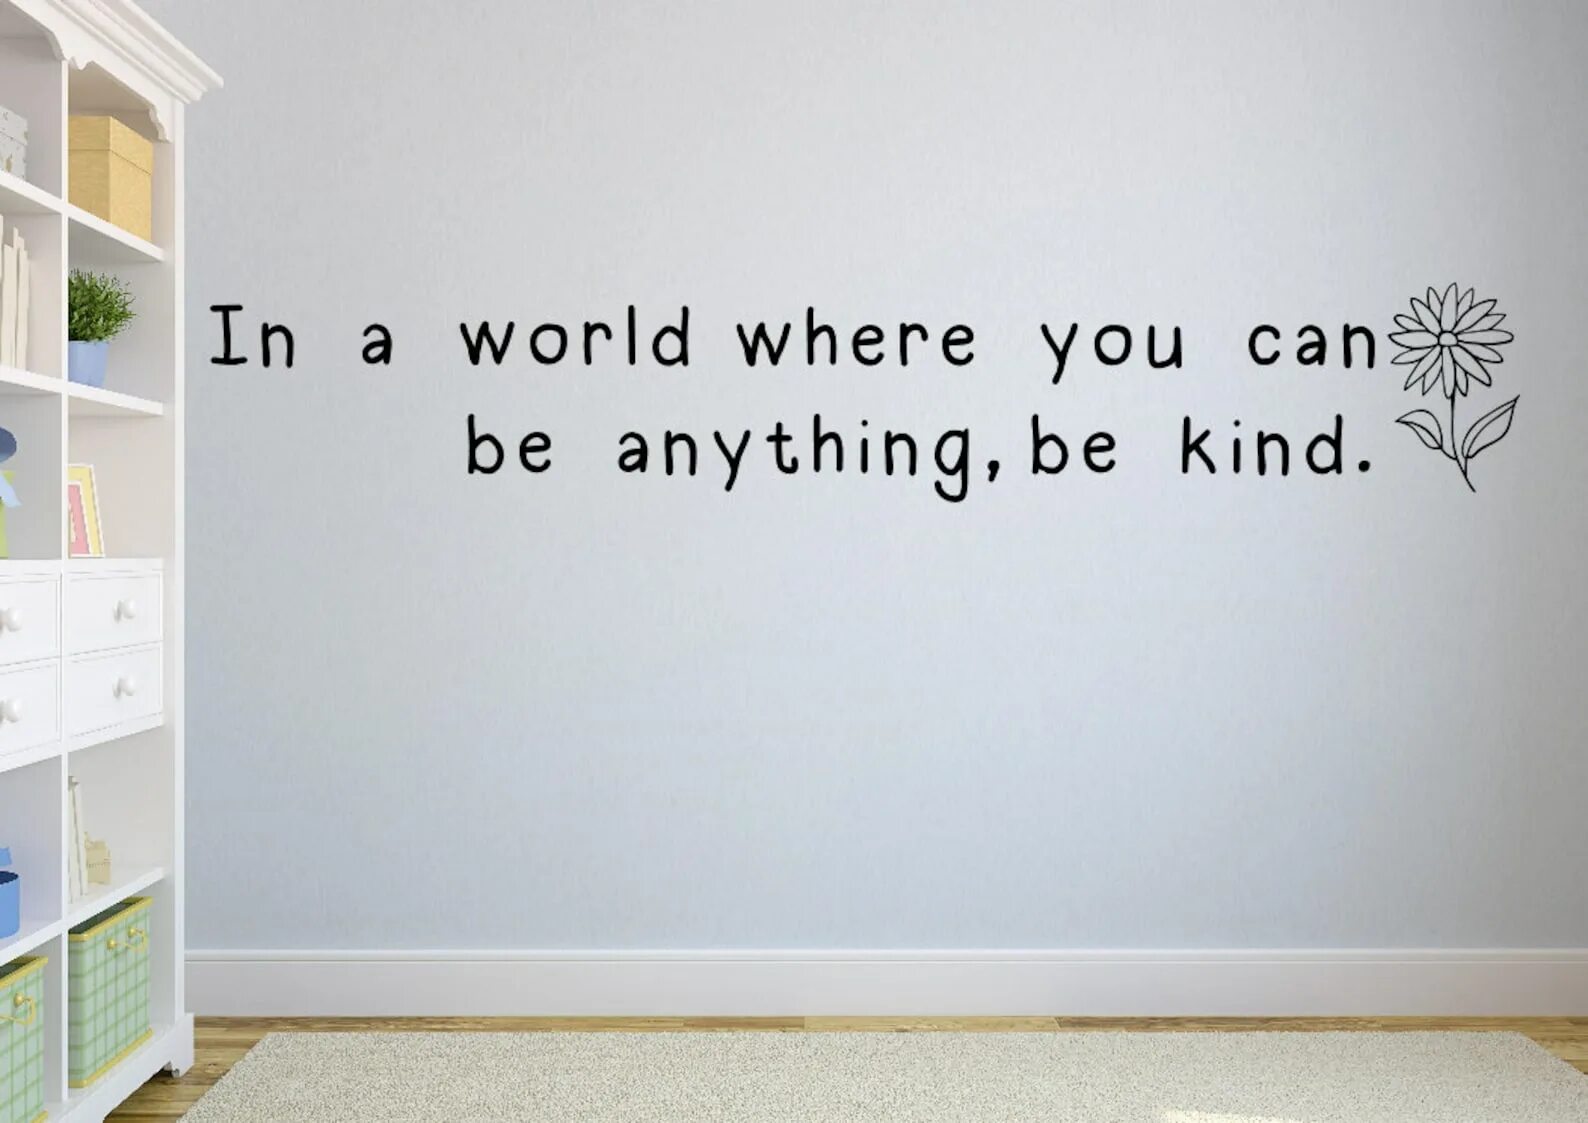 Be kind слова. In a World where you can be anything be kind. Be kind картинка. Be kind обои серые. Be kind пикселями.